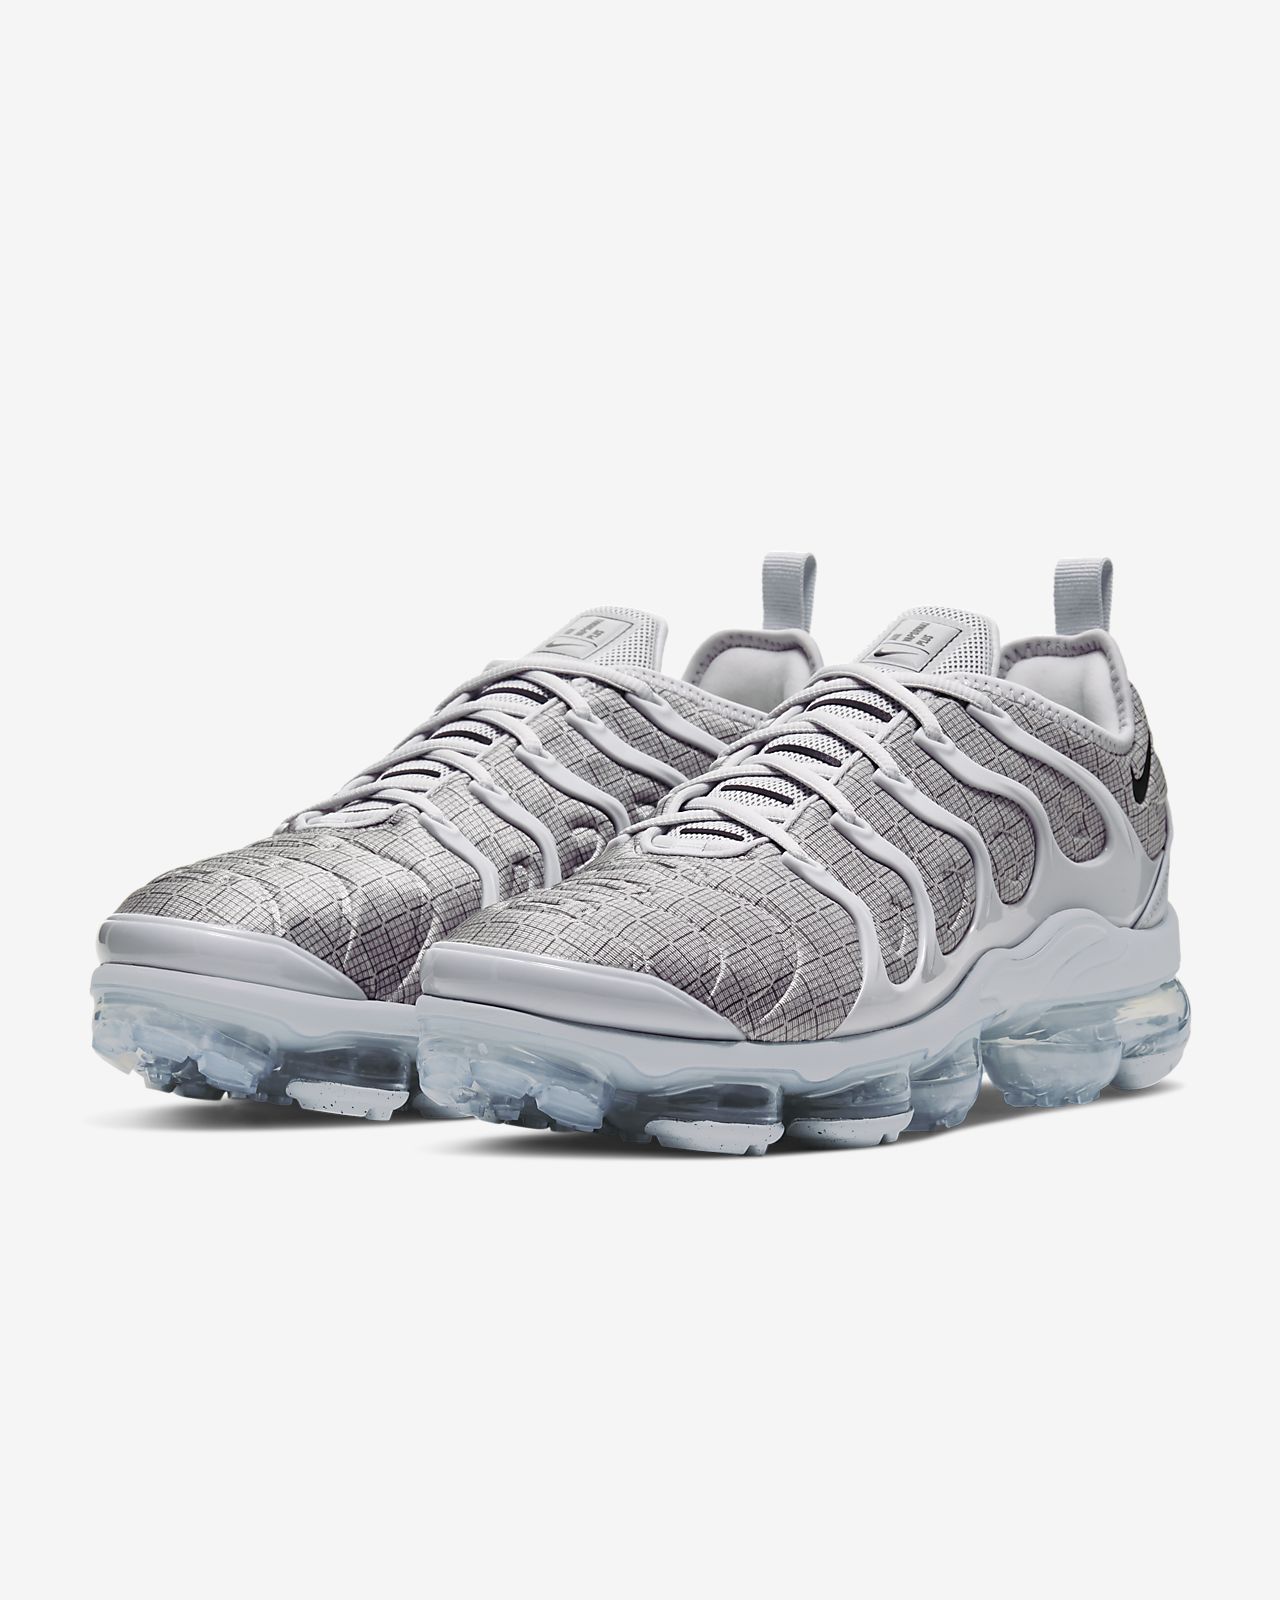 The NIKE AIR VAPORMAX PLUS OVERBRANDED are now